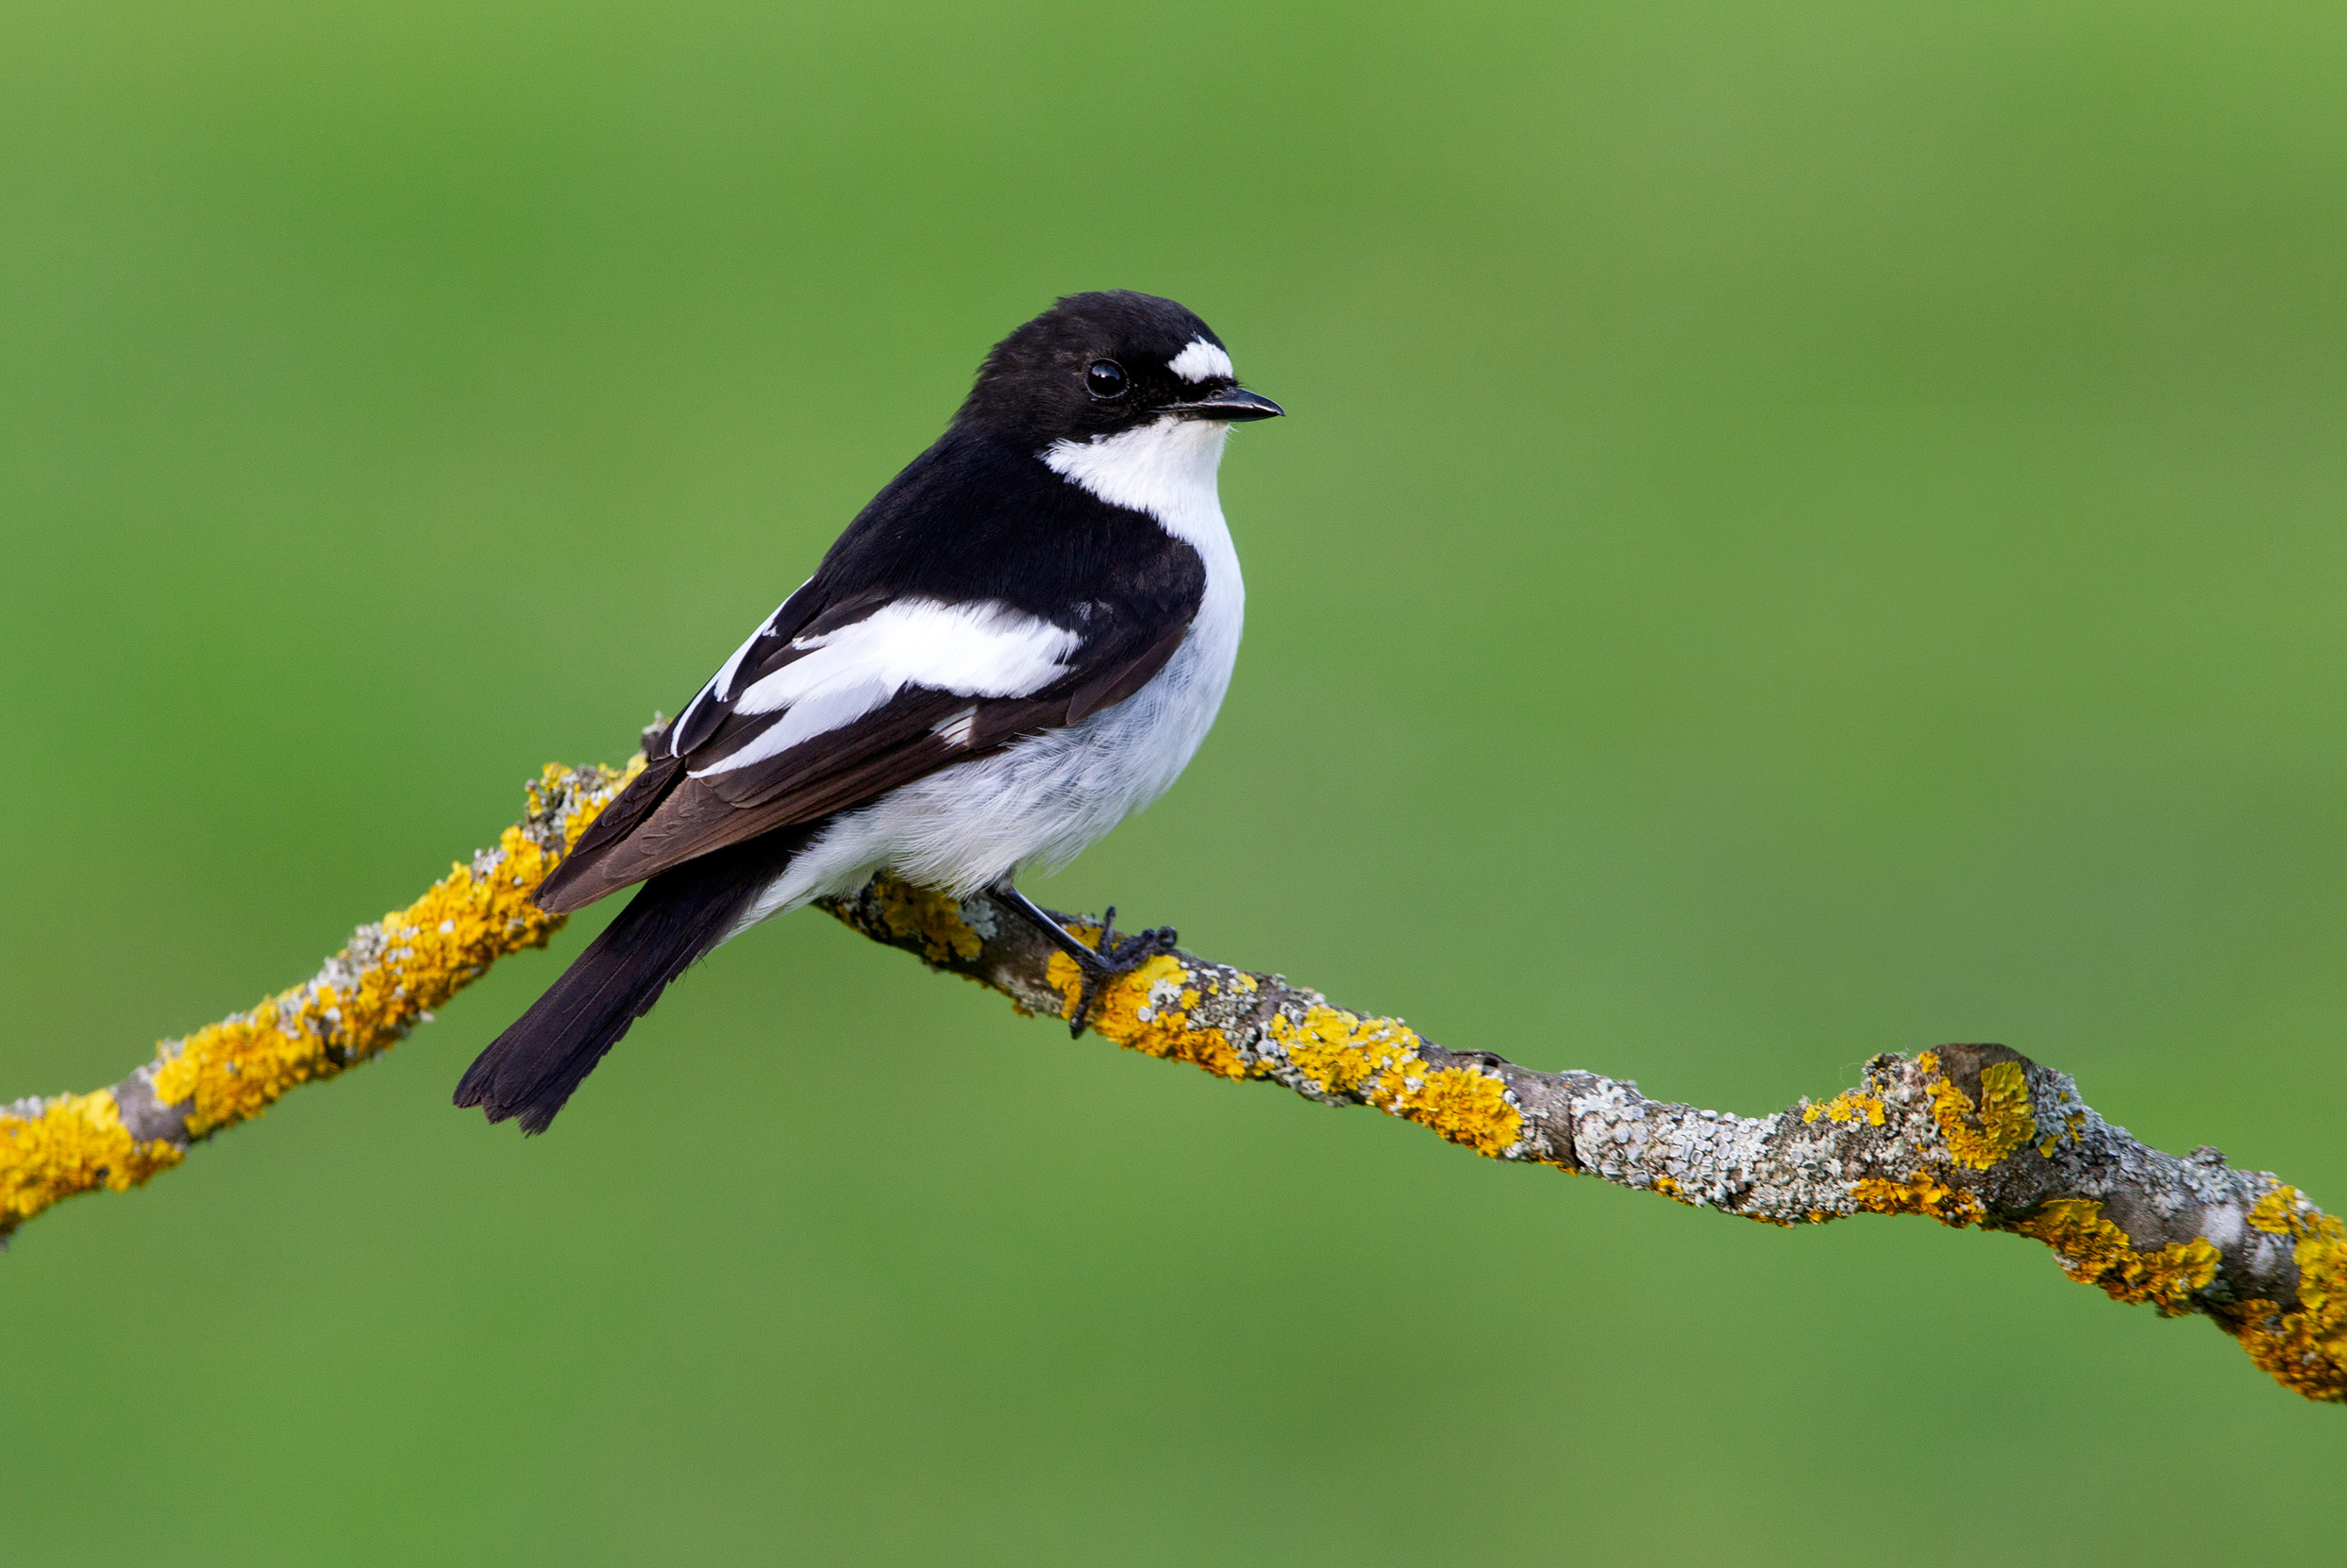 Male Pied Flycatcher perched on lichen covered twig